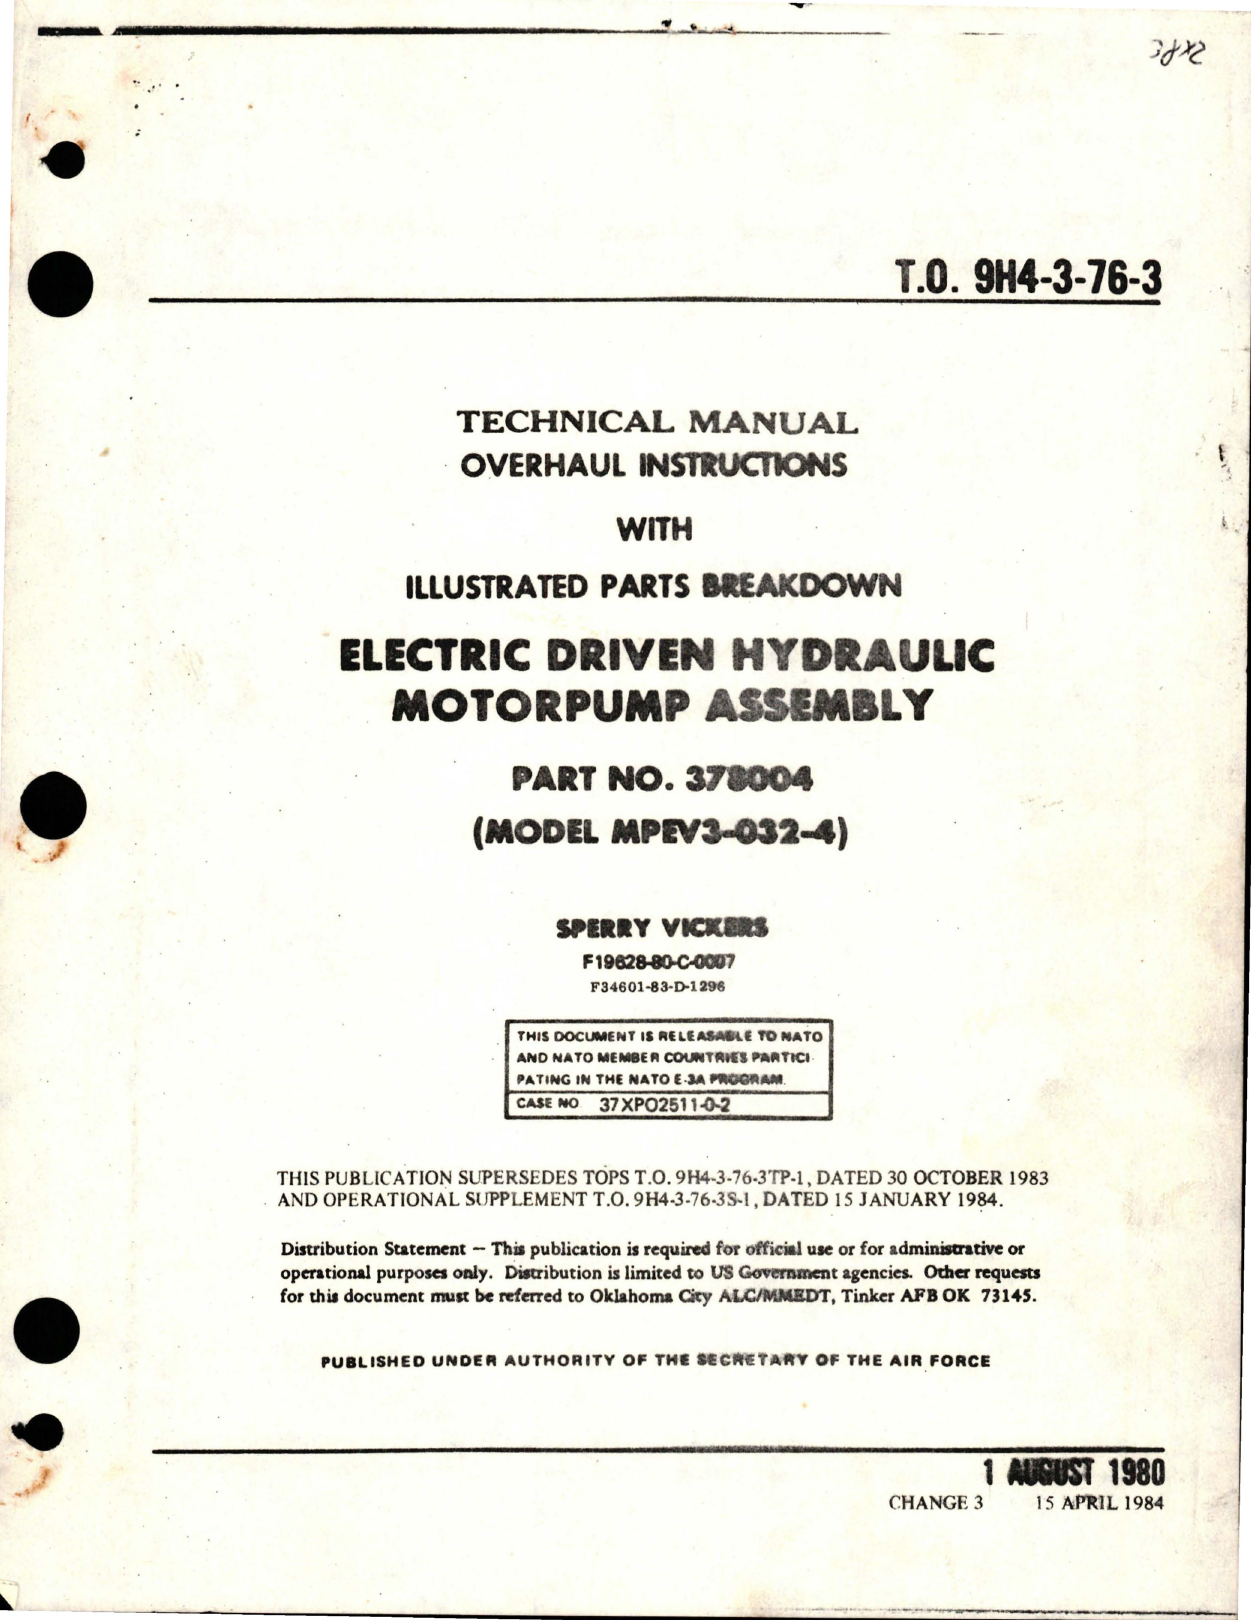 Sample page 1 from AirCorps Library document: Overhaul Instructions with Illustrated Parts for Electric Driven Hydraulic Motorpump Assembly - Part 378004 - Model MPEV3-032-4